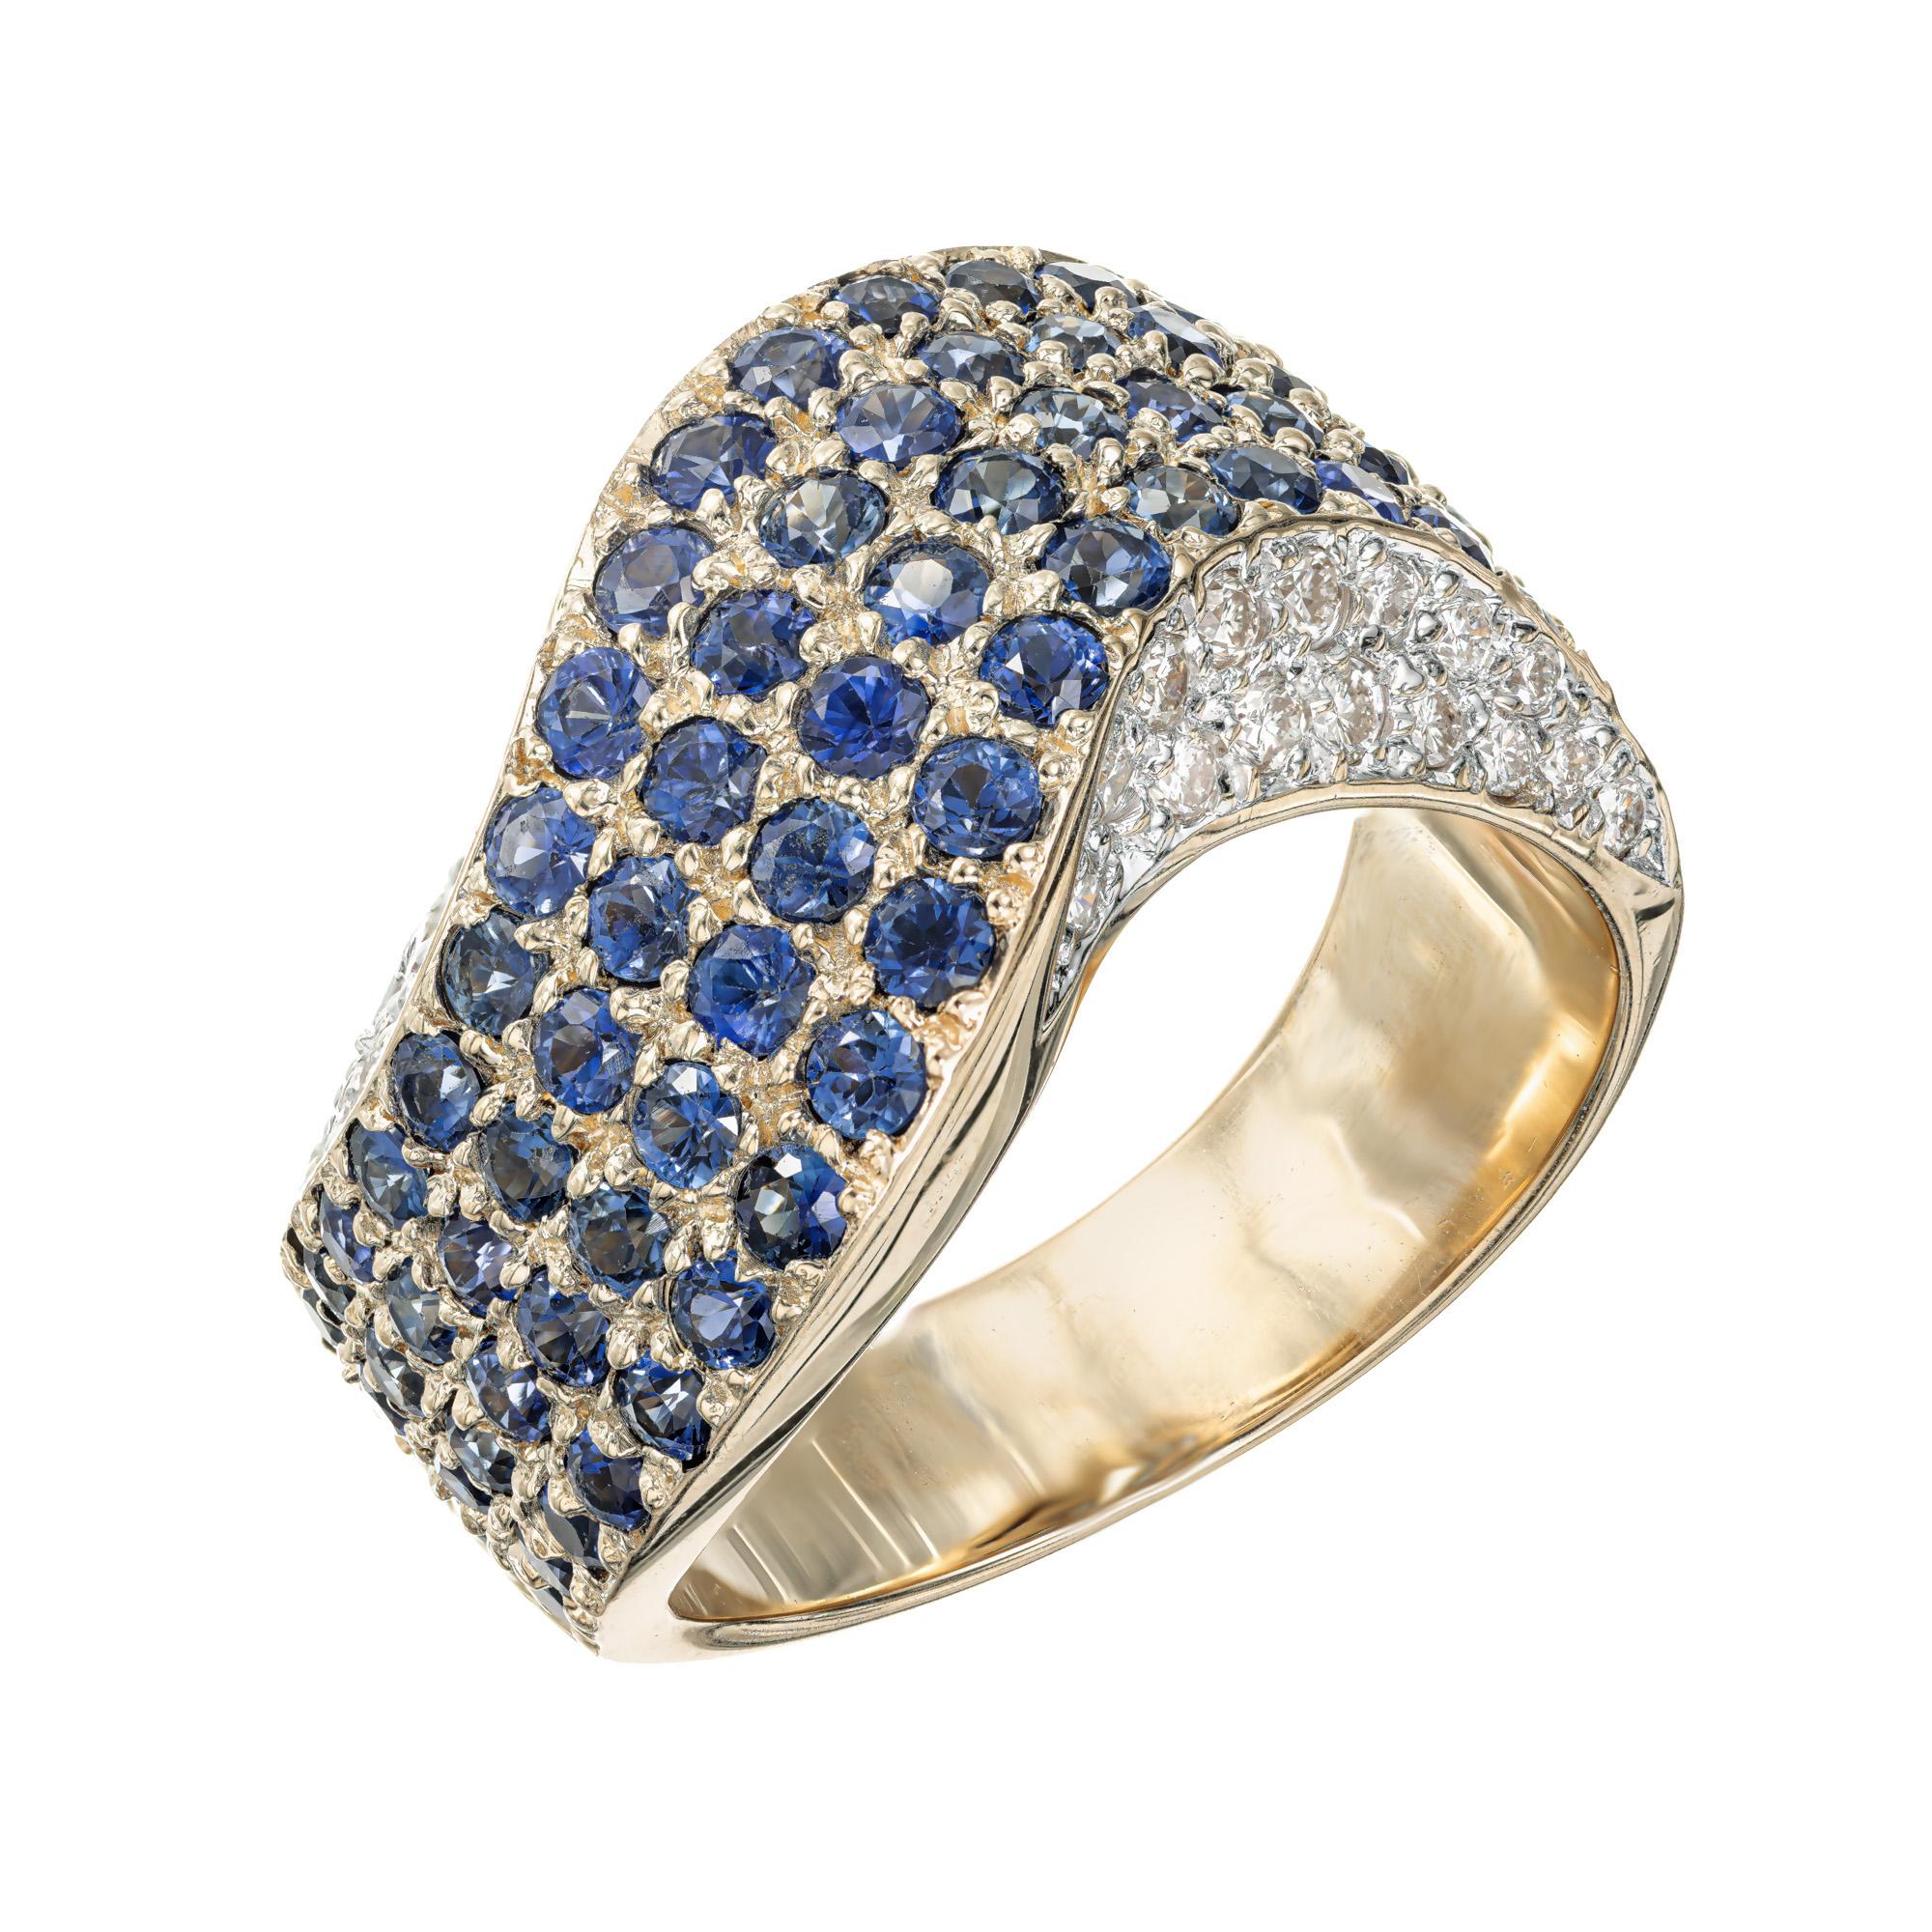 Sapphire and diamond swirl band ring. Slightly tapered domed swirl ring with a wave with 76 round sapphires and 36 round diamonds set in 14k yellow gold. The top is pave set with 4 rows of genuine bright sapphires. Each side is also pave set with 2